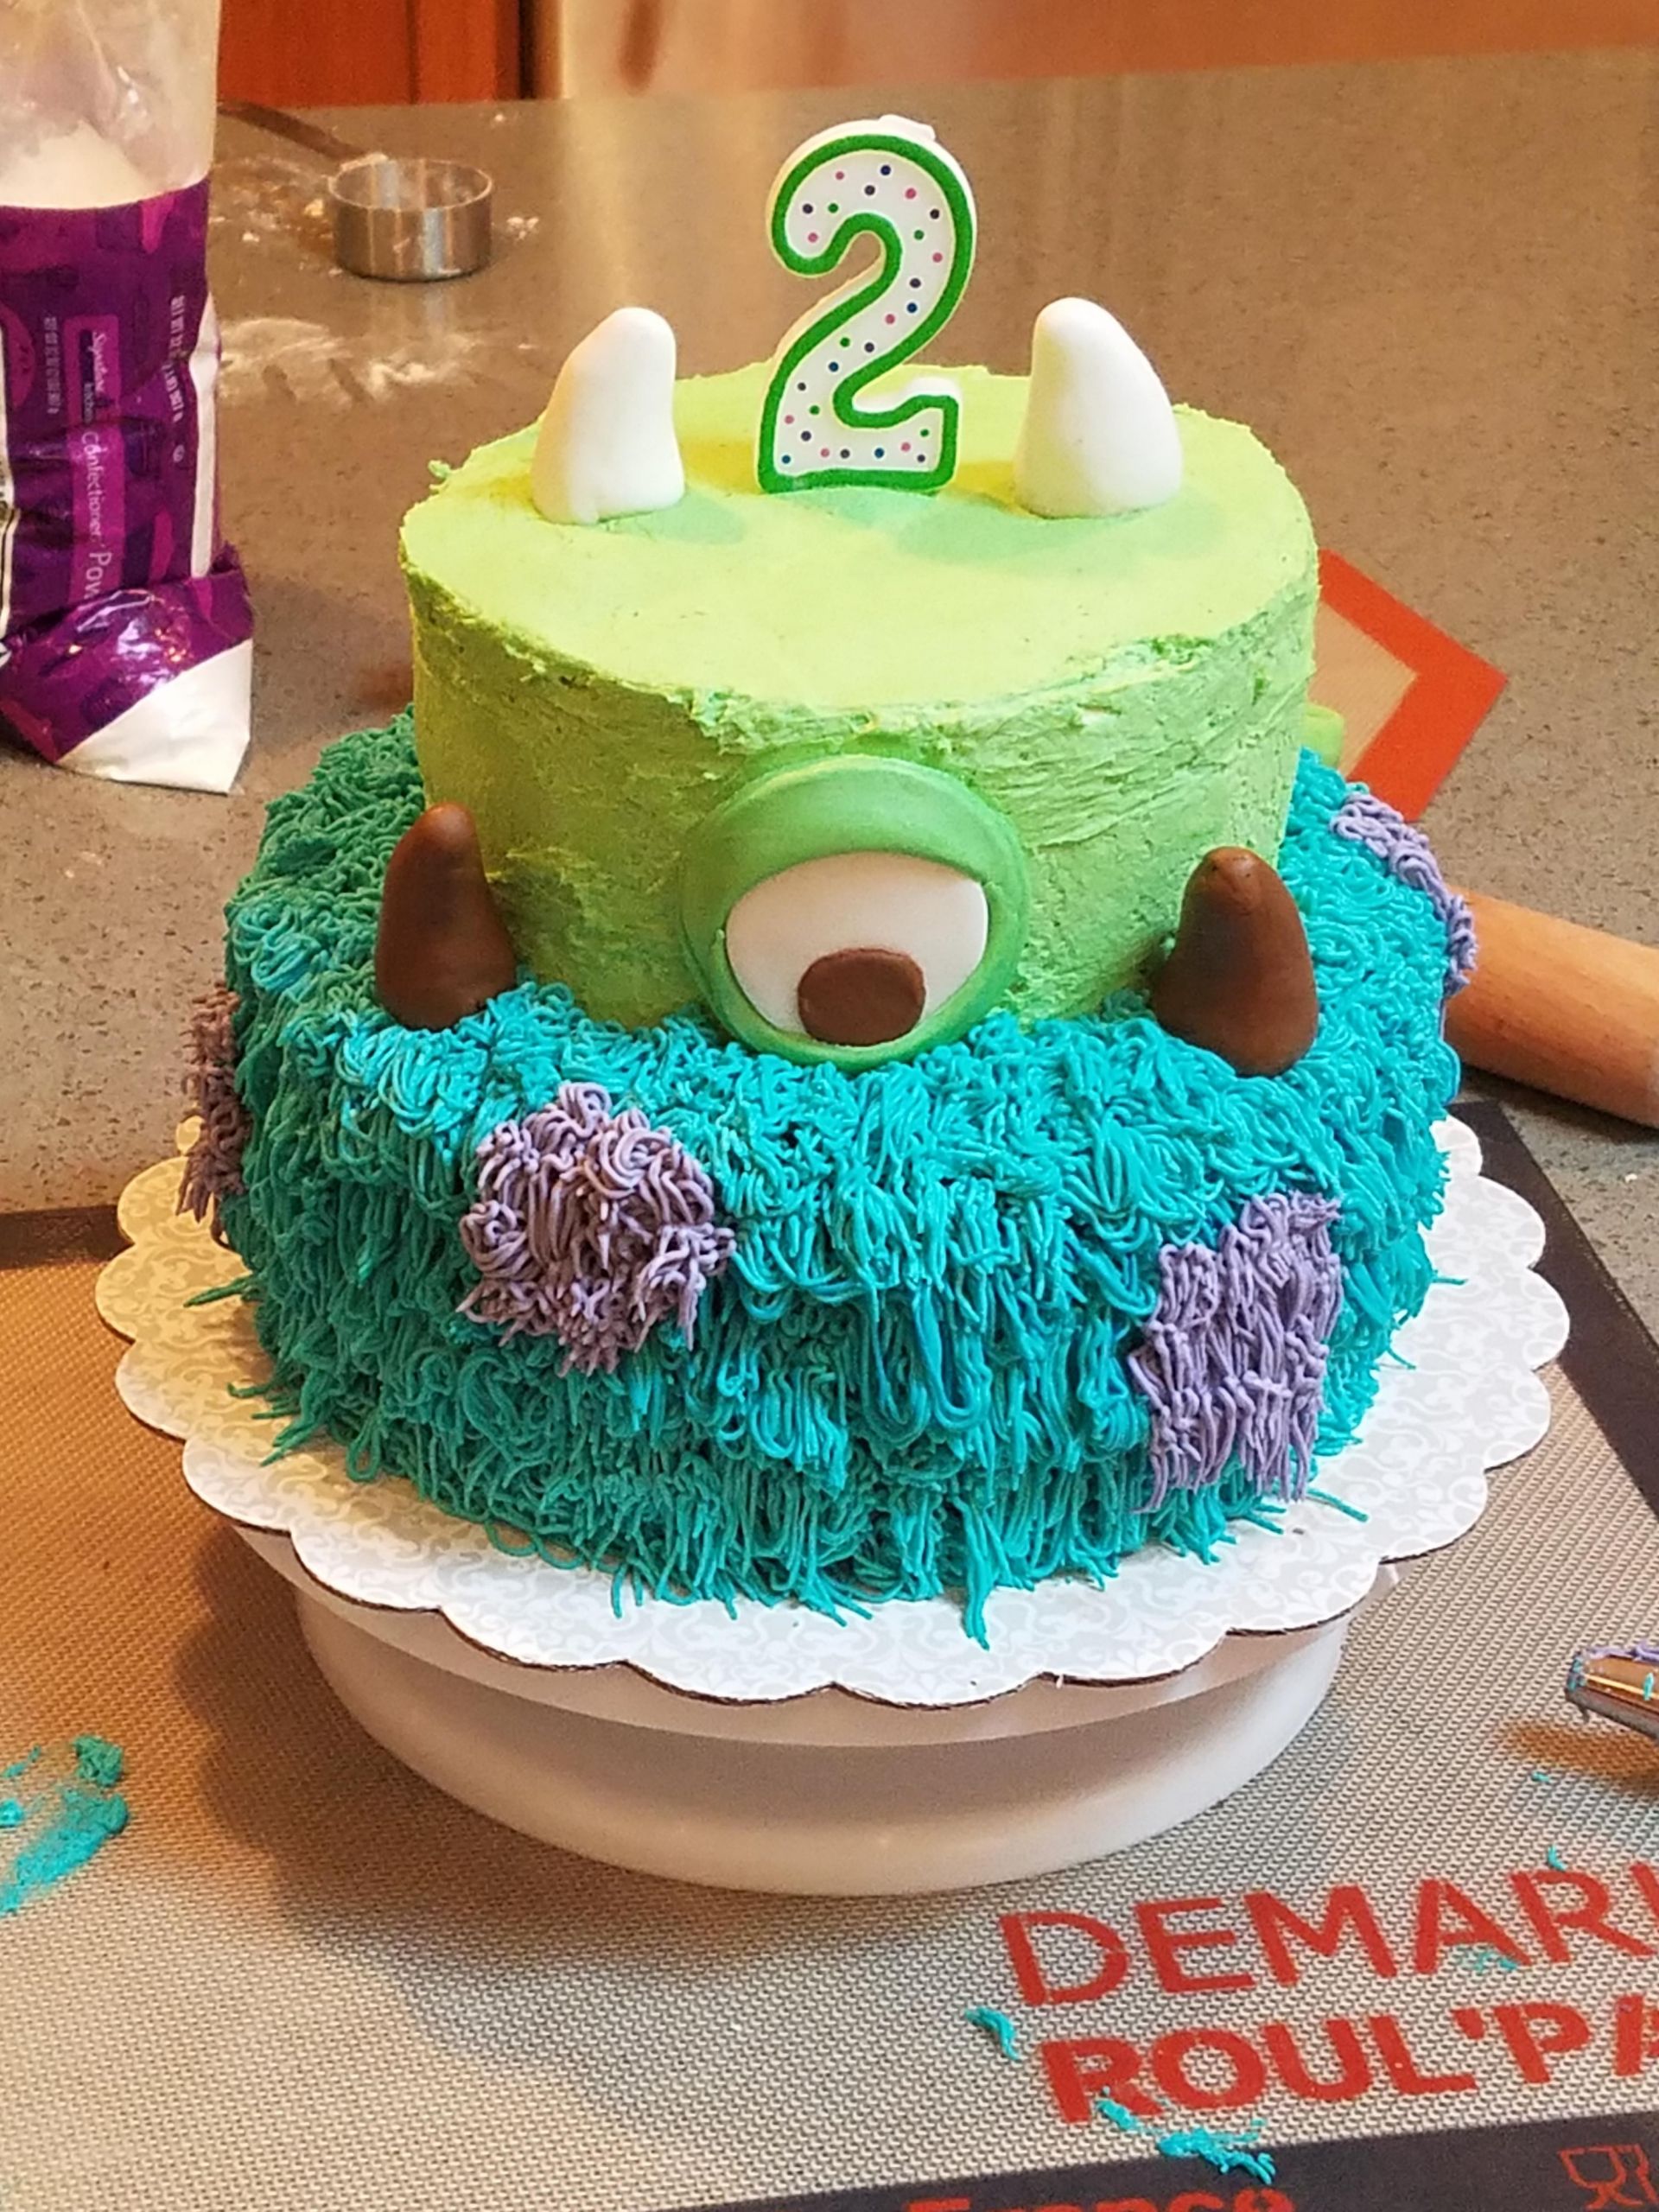 2 Year Old Birthday Cakes
 Birthday cake for my 2 year old He loves Monsters Inc